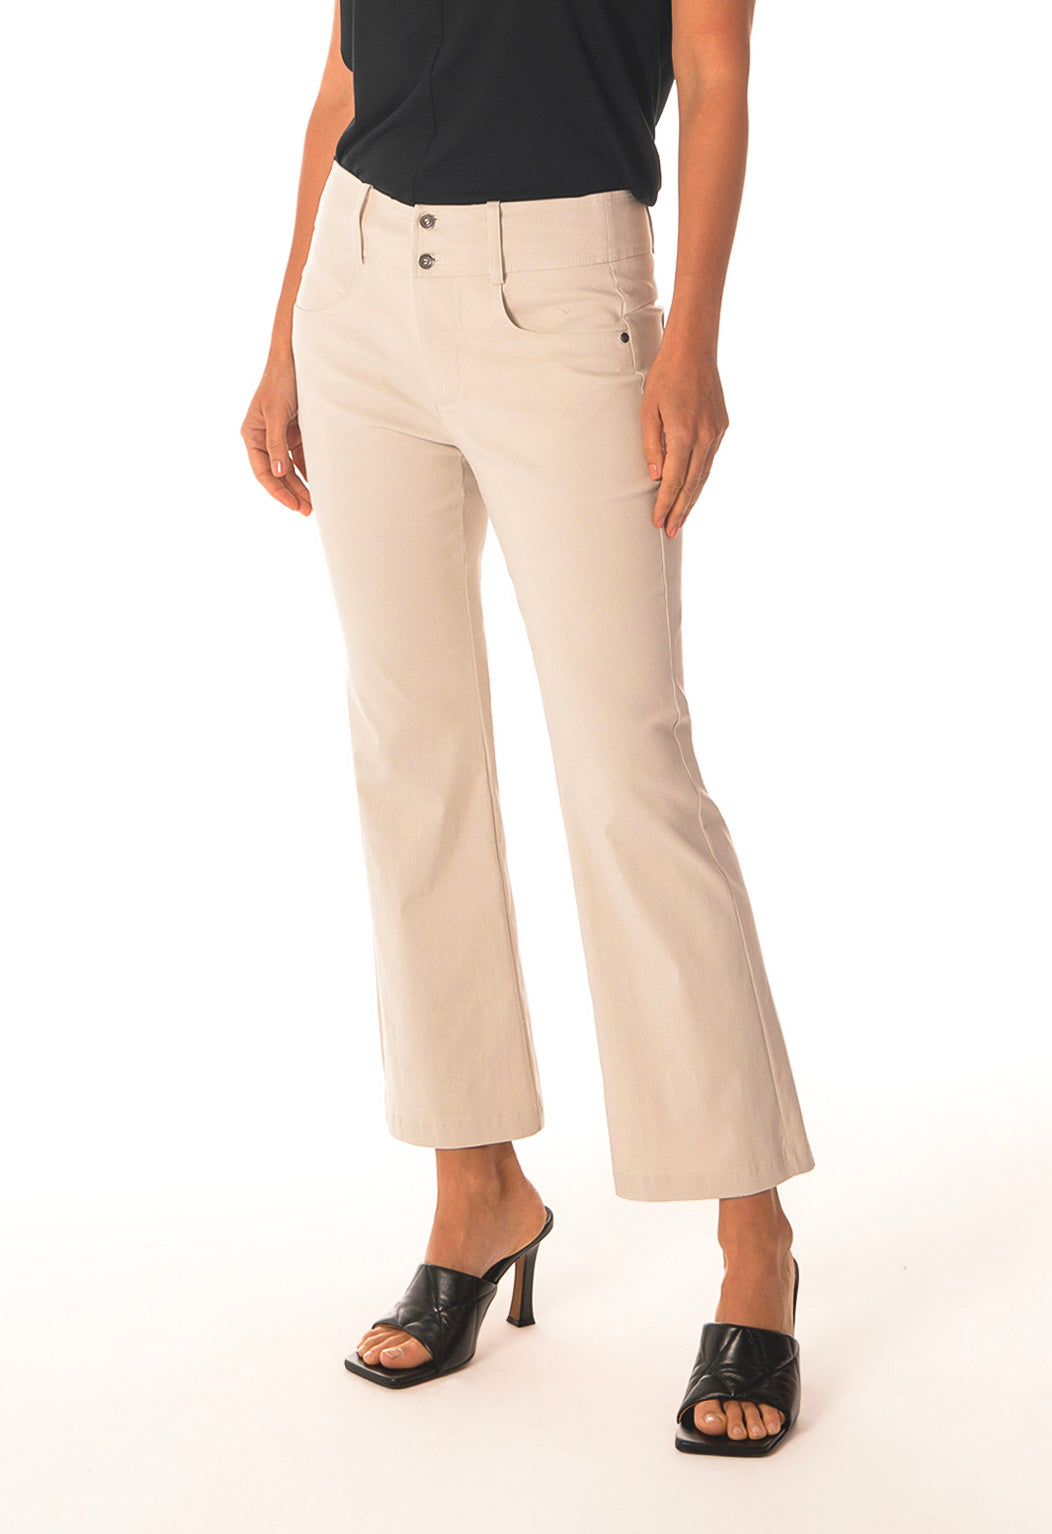 CROP FLARE PANT (OFF WHITE) - BRENDA BEDDOME